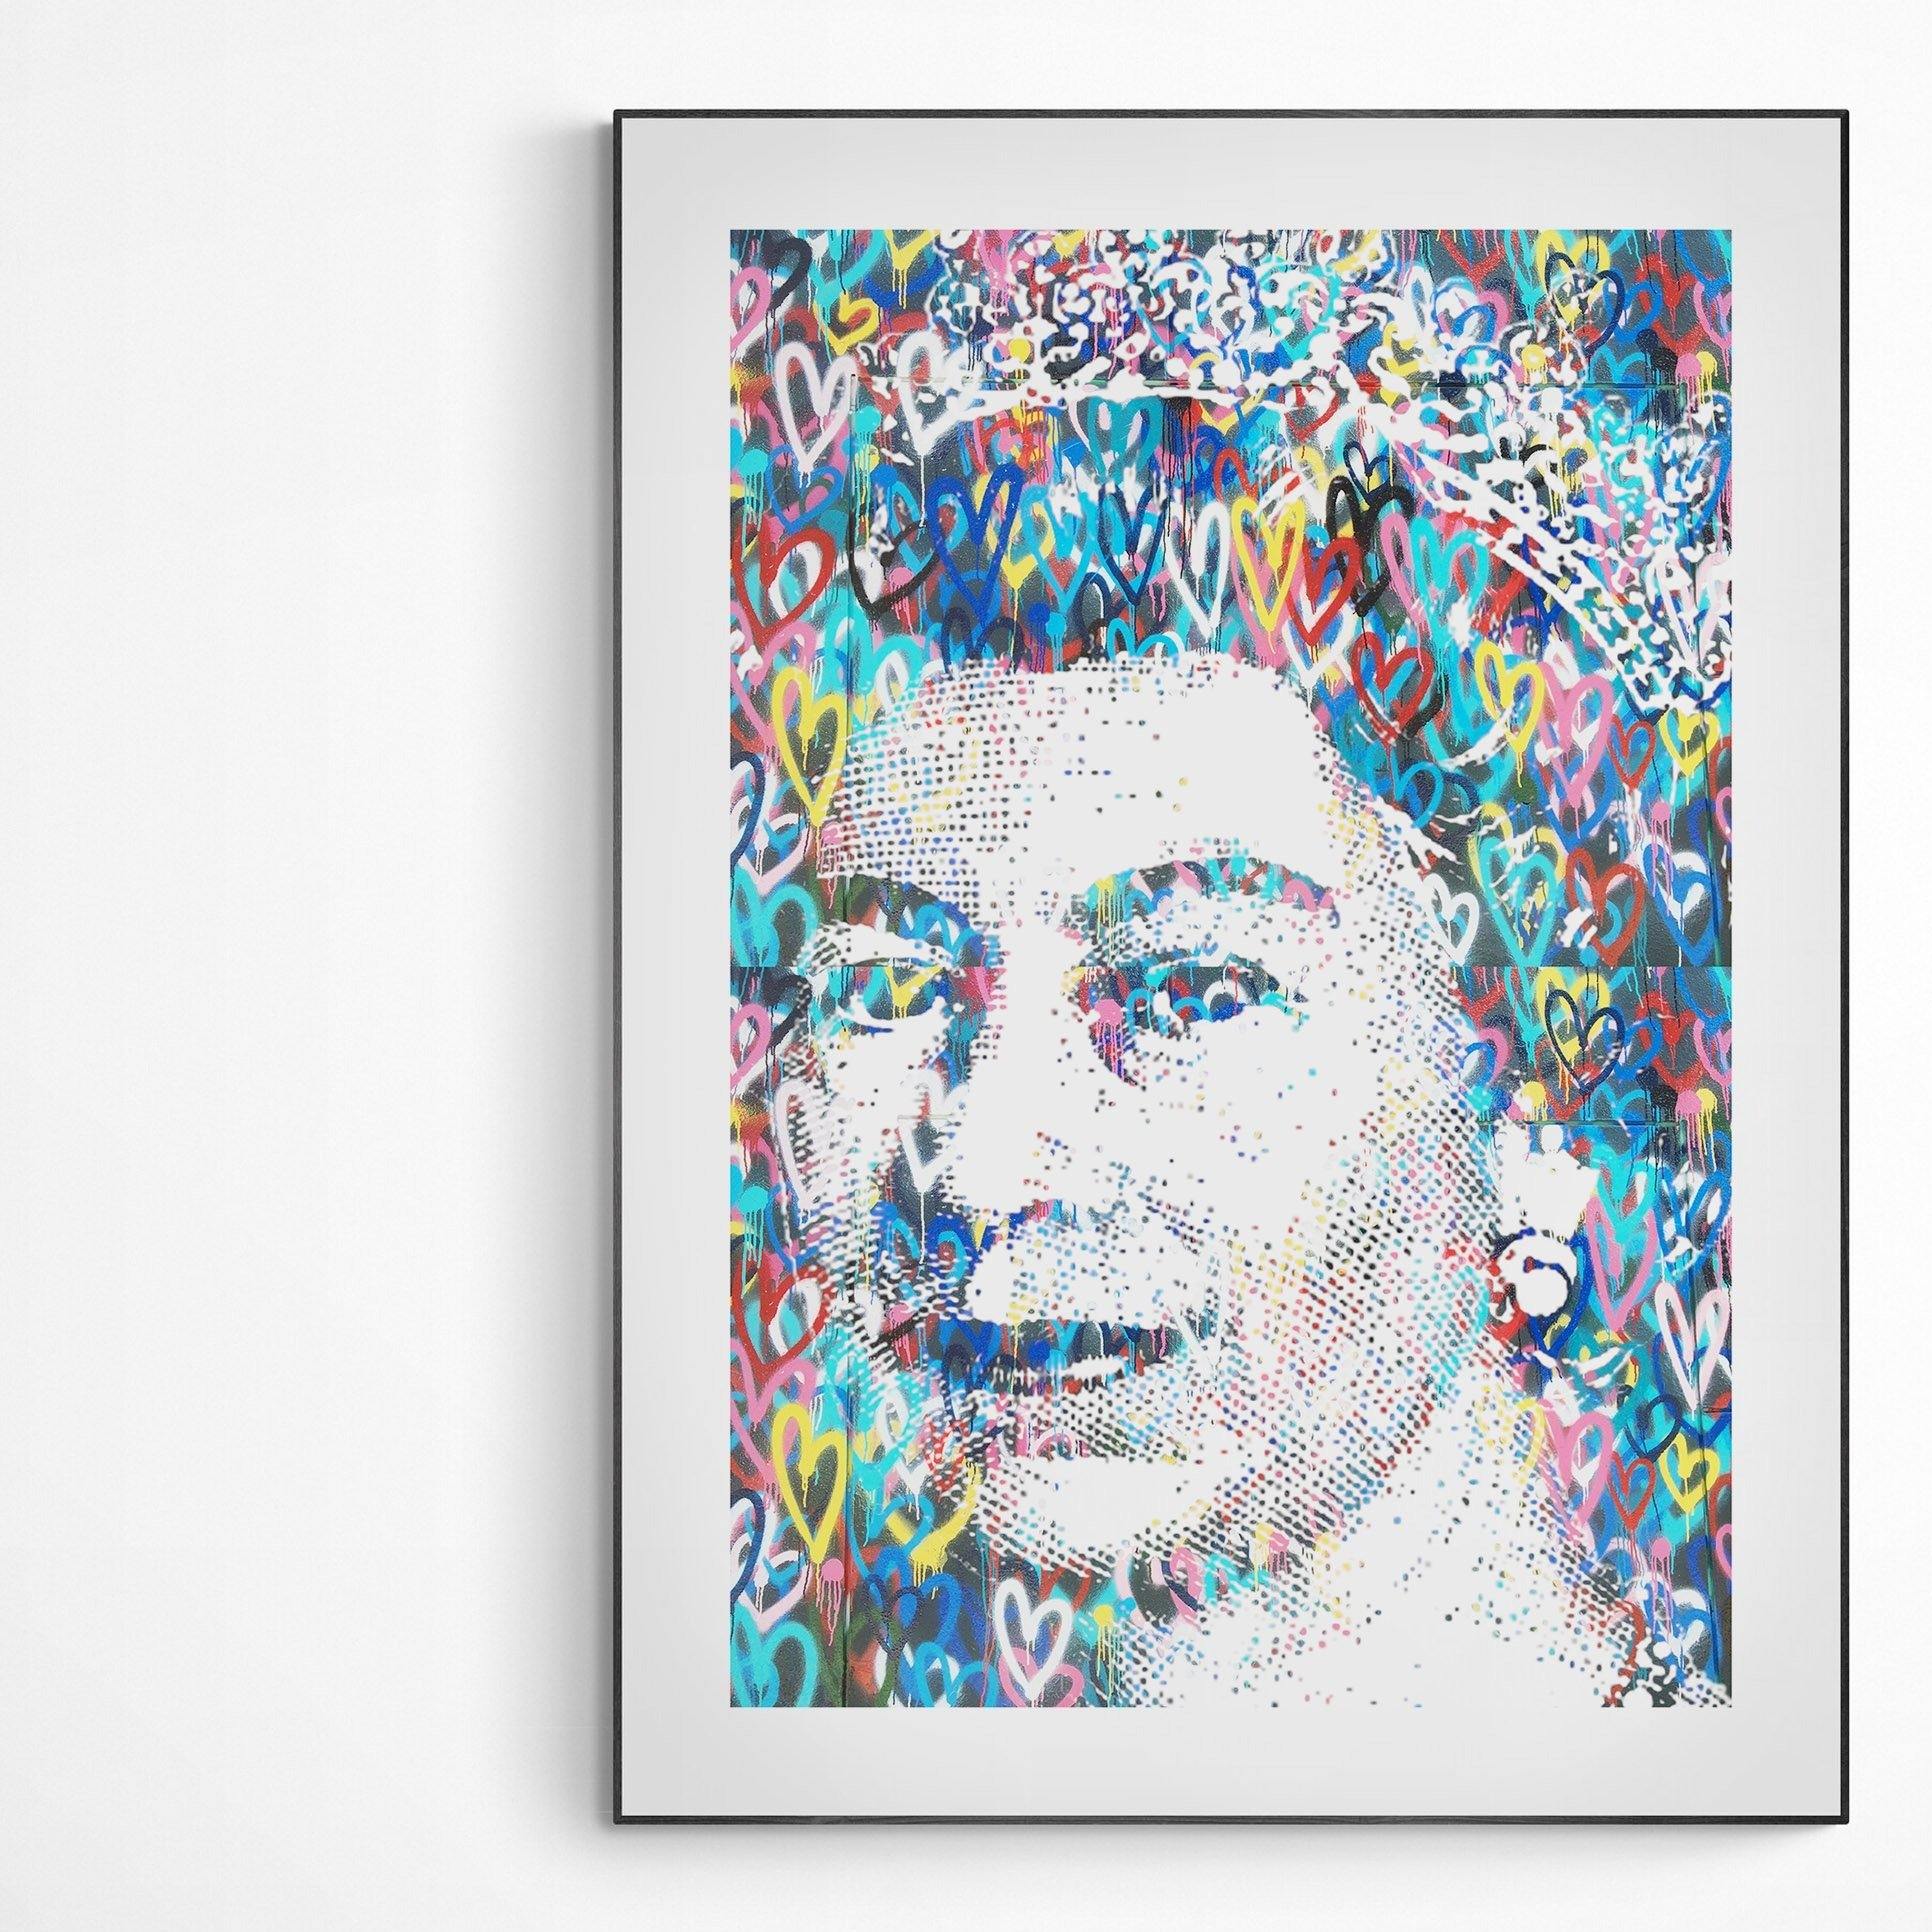 Queen Elizabeth Love Print | Original Poster Art | Fun Print Quote | Motivational Poster Wall Art Decor | Greeting Card Gifts | Variety Sizes